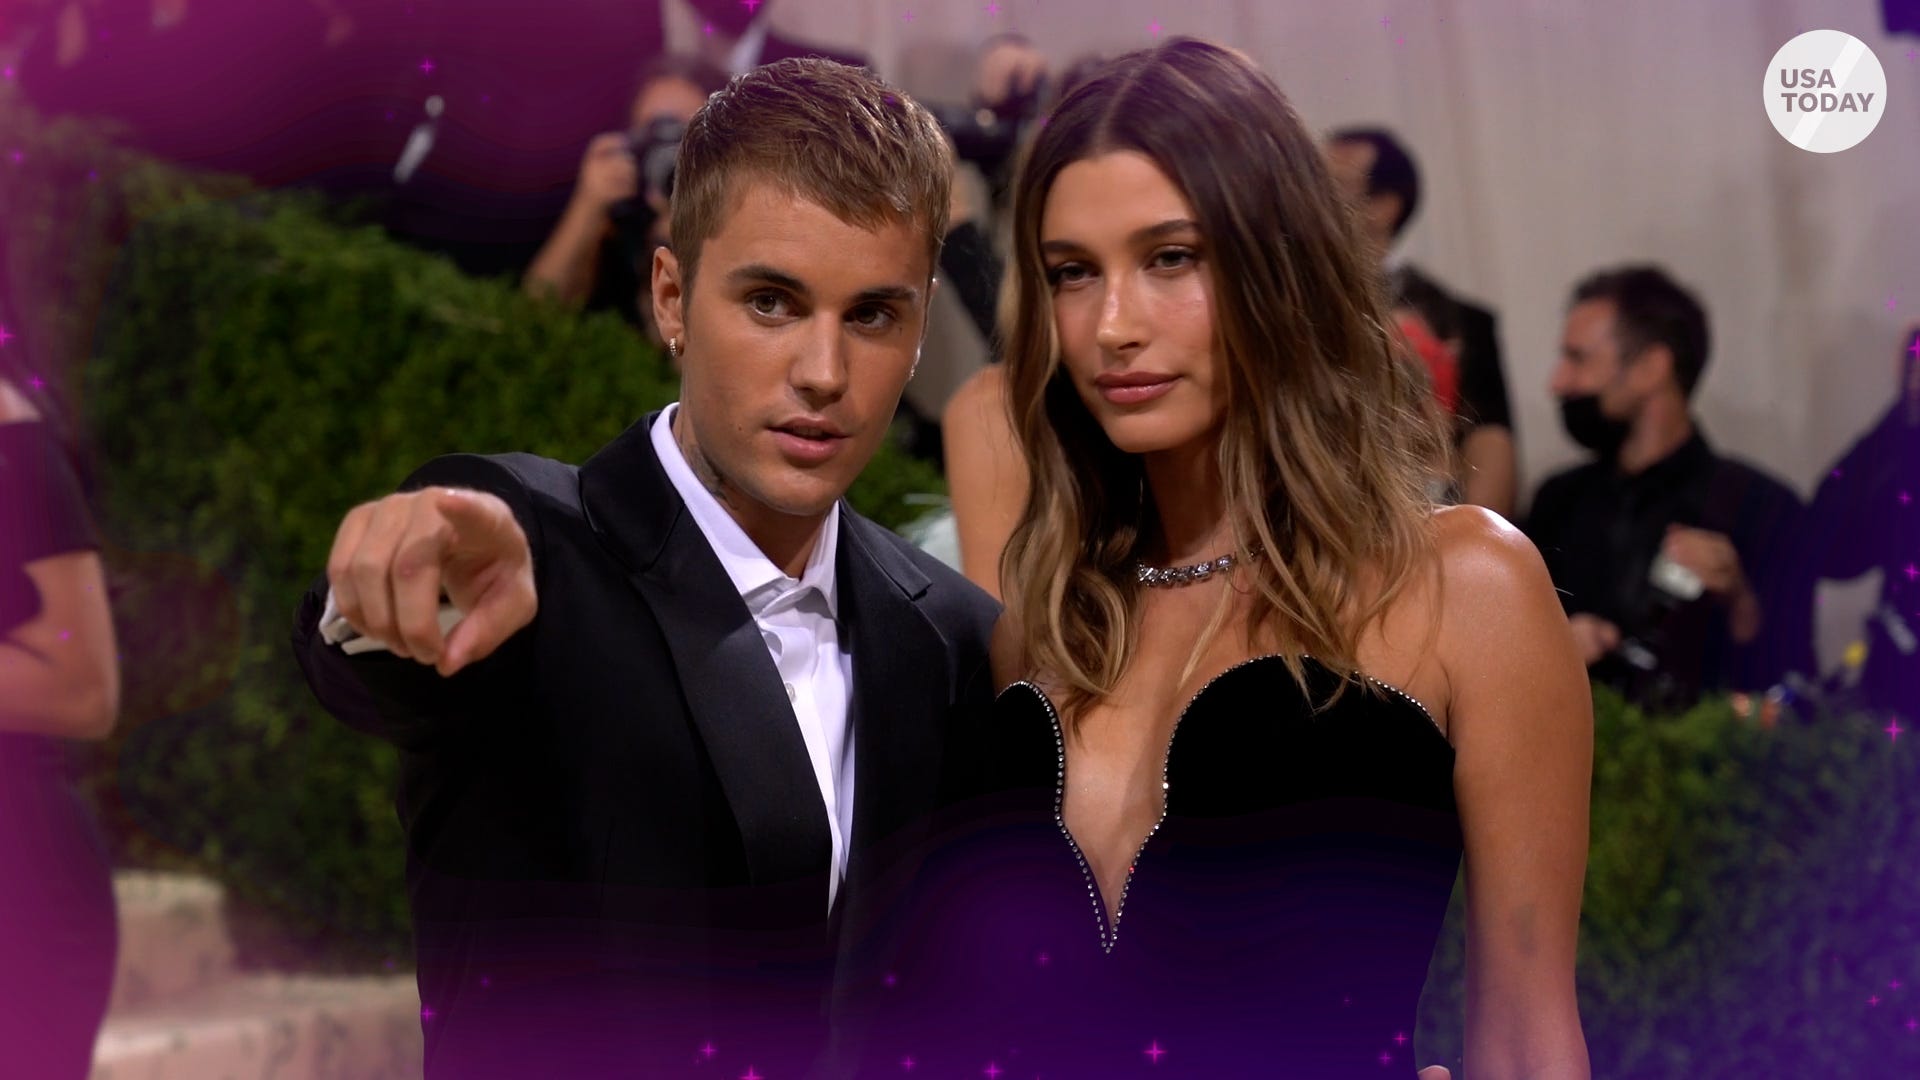 'I did something that really hurt him': Hailey and Justin Bieber's relationship revelation thumbnail